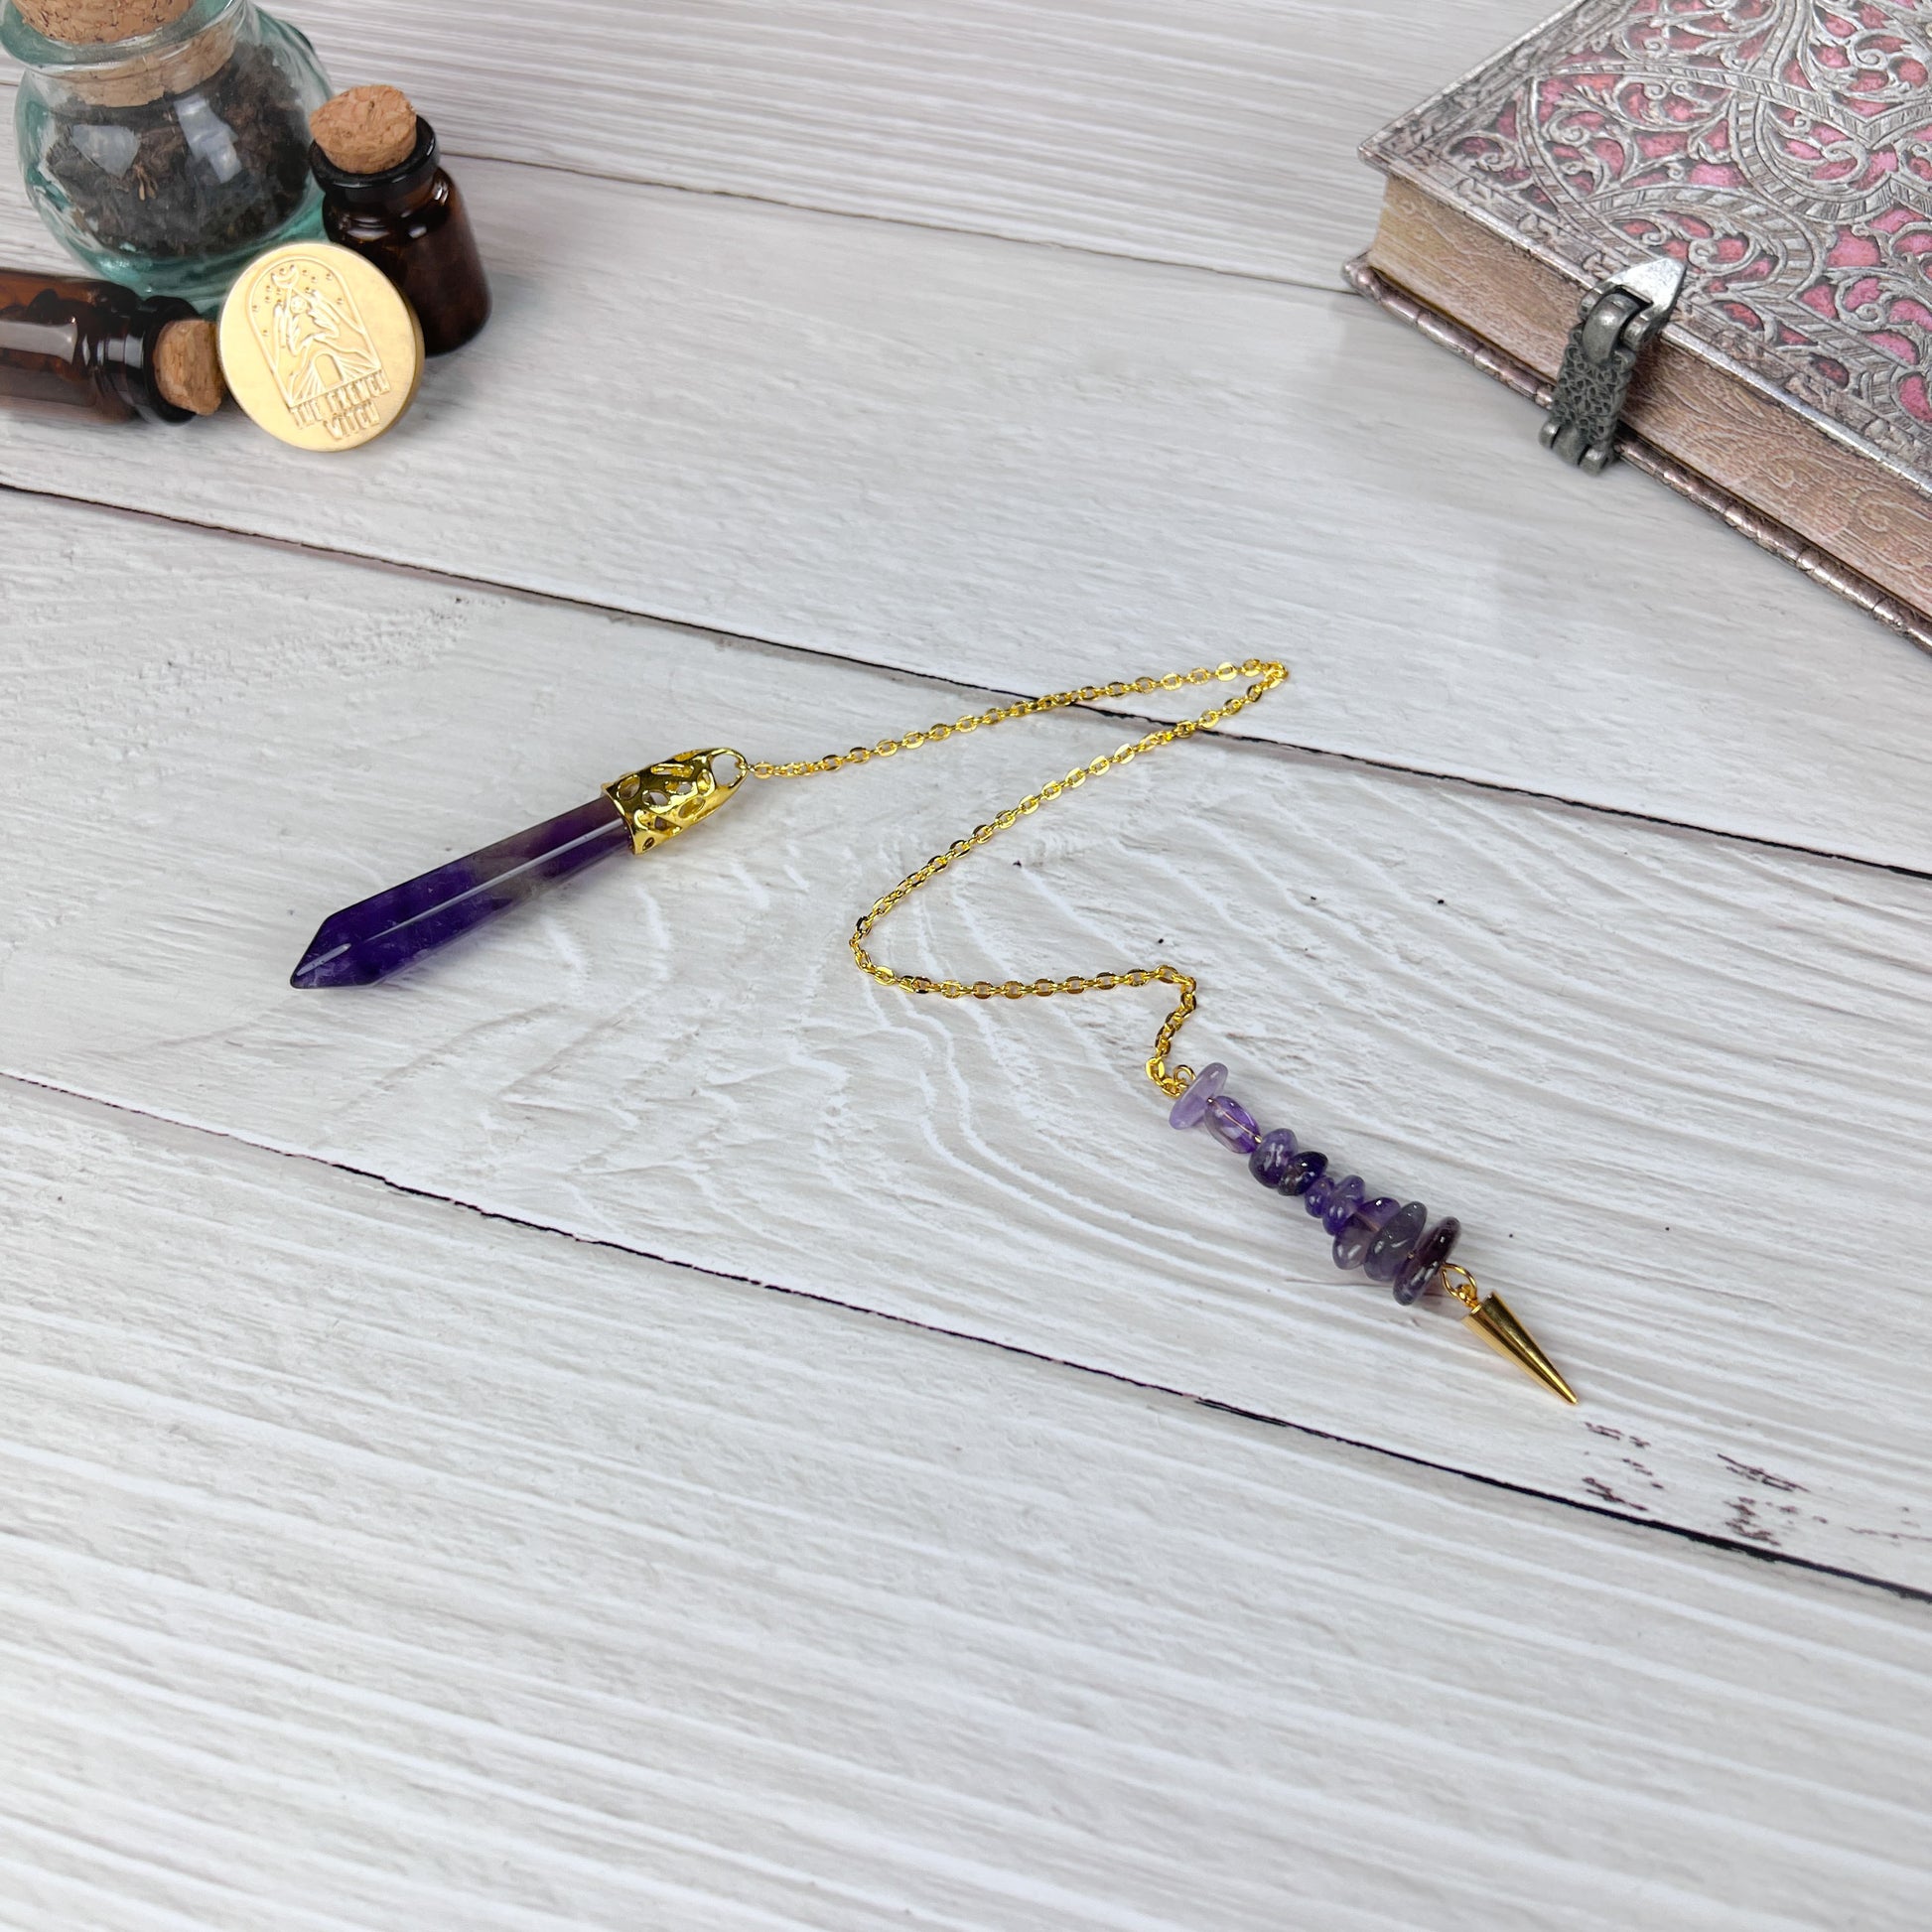 gold amethyst dowing pendulum gemstone divination tool for witchcraft energy session reiki pagan wiccan witch